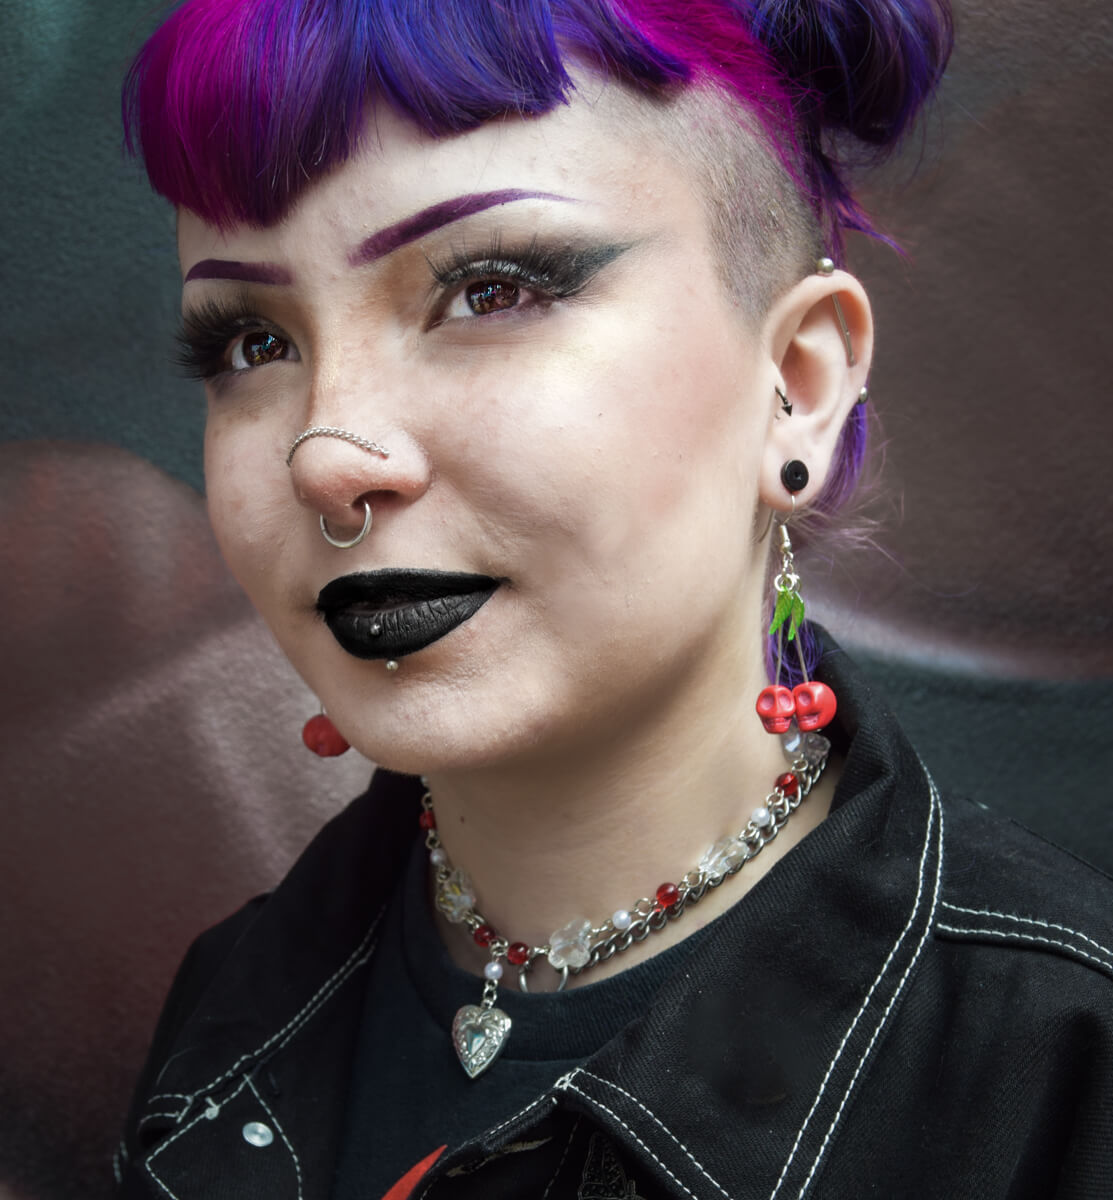 Jewellery from the darkside – Silver and Goth